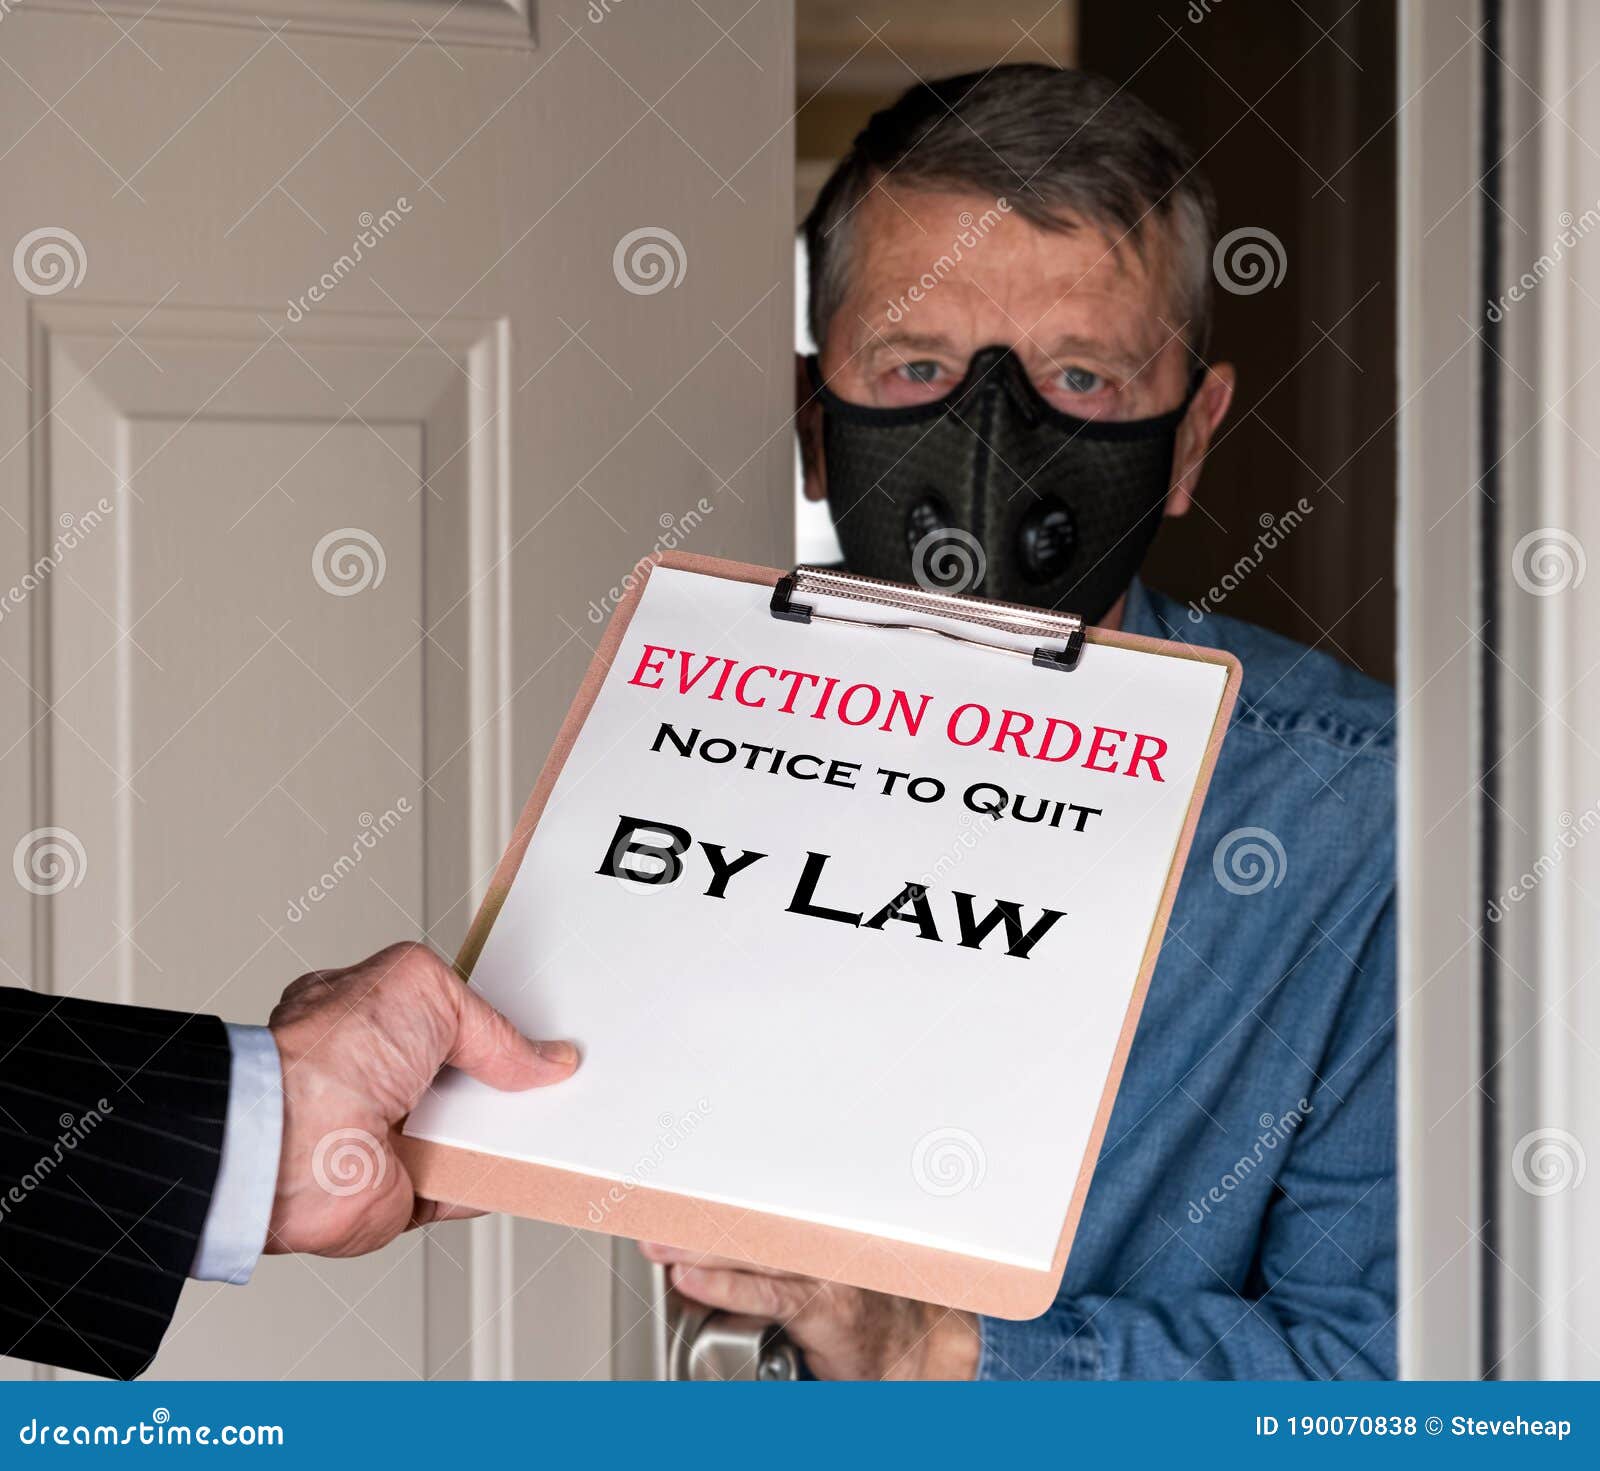 man in suit giving eviction notice to renter or tenant of home